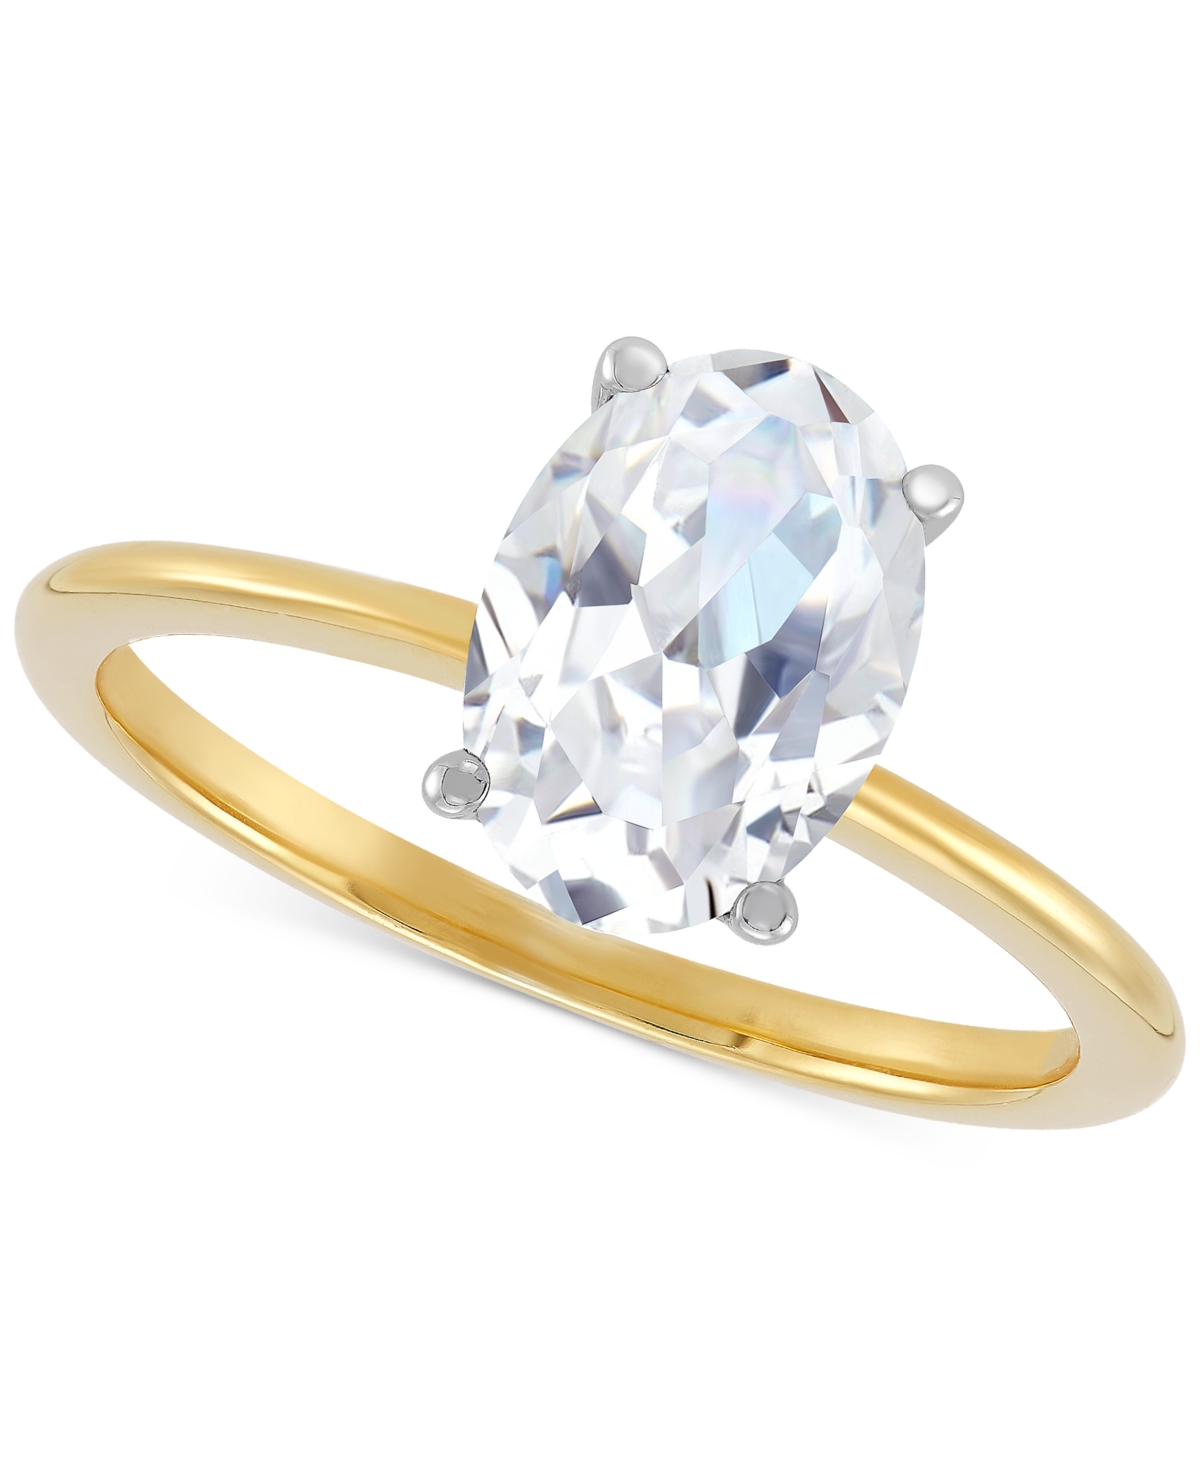 Grown With Love Igi Certified Lab Grown Diamond Oval Solitaire Engagement Ring In 14k Gold In Two Tone